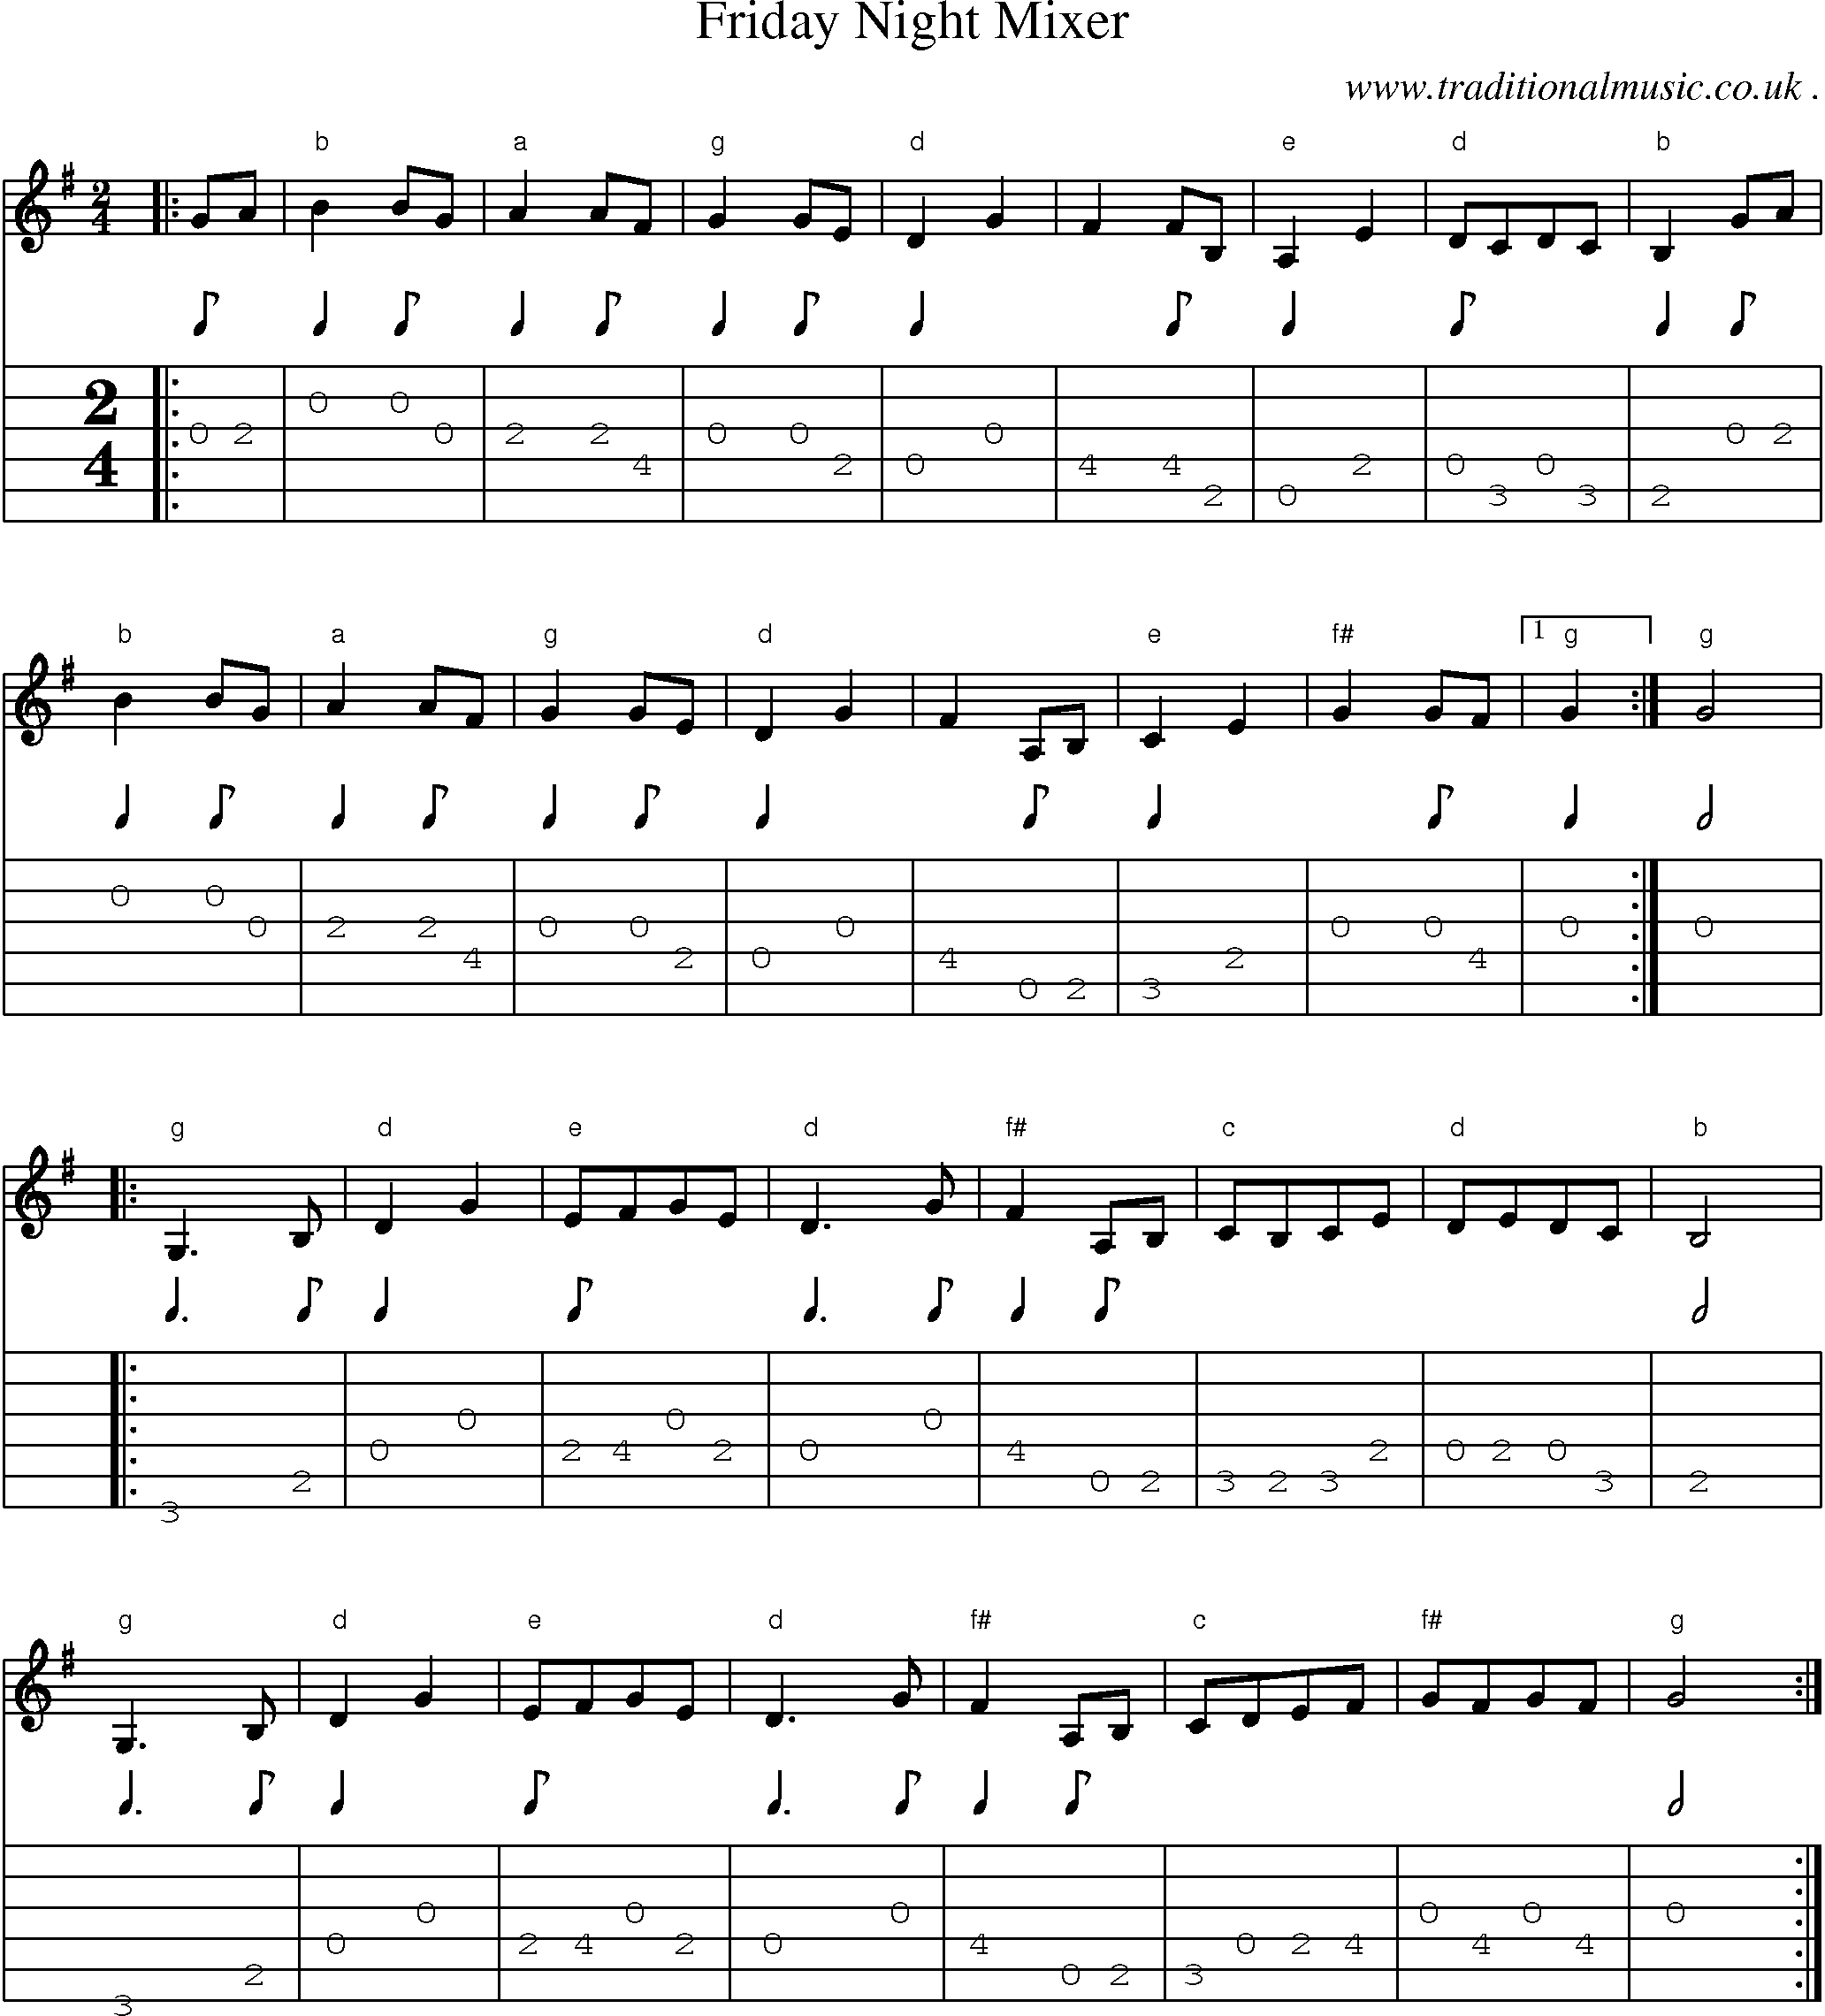 Sheet-Music and Guitar Tabs for Friday Night Mixer